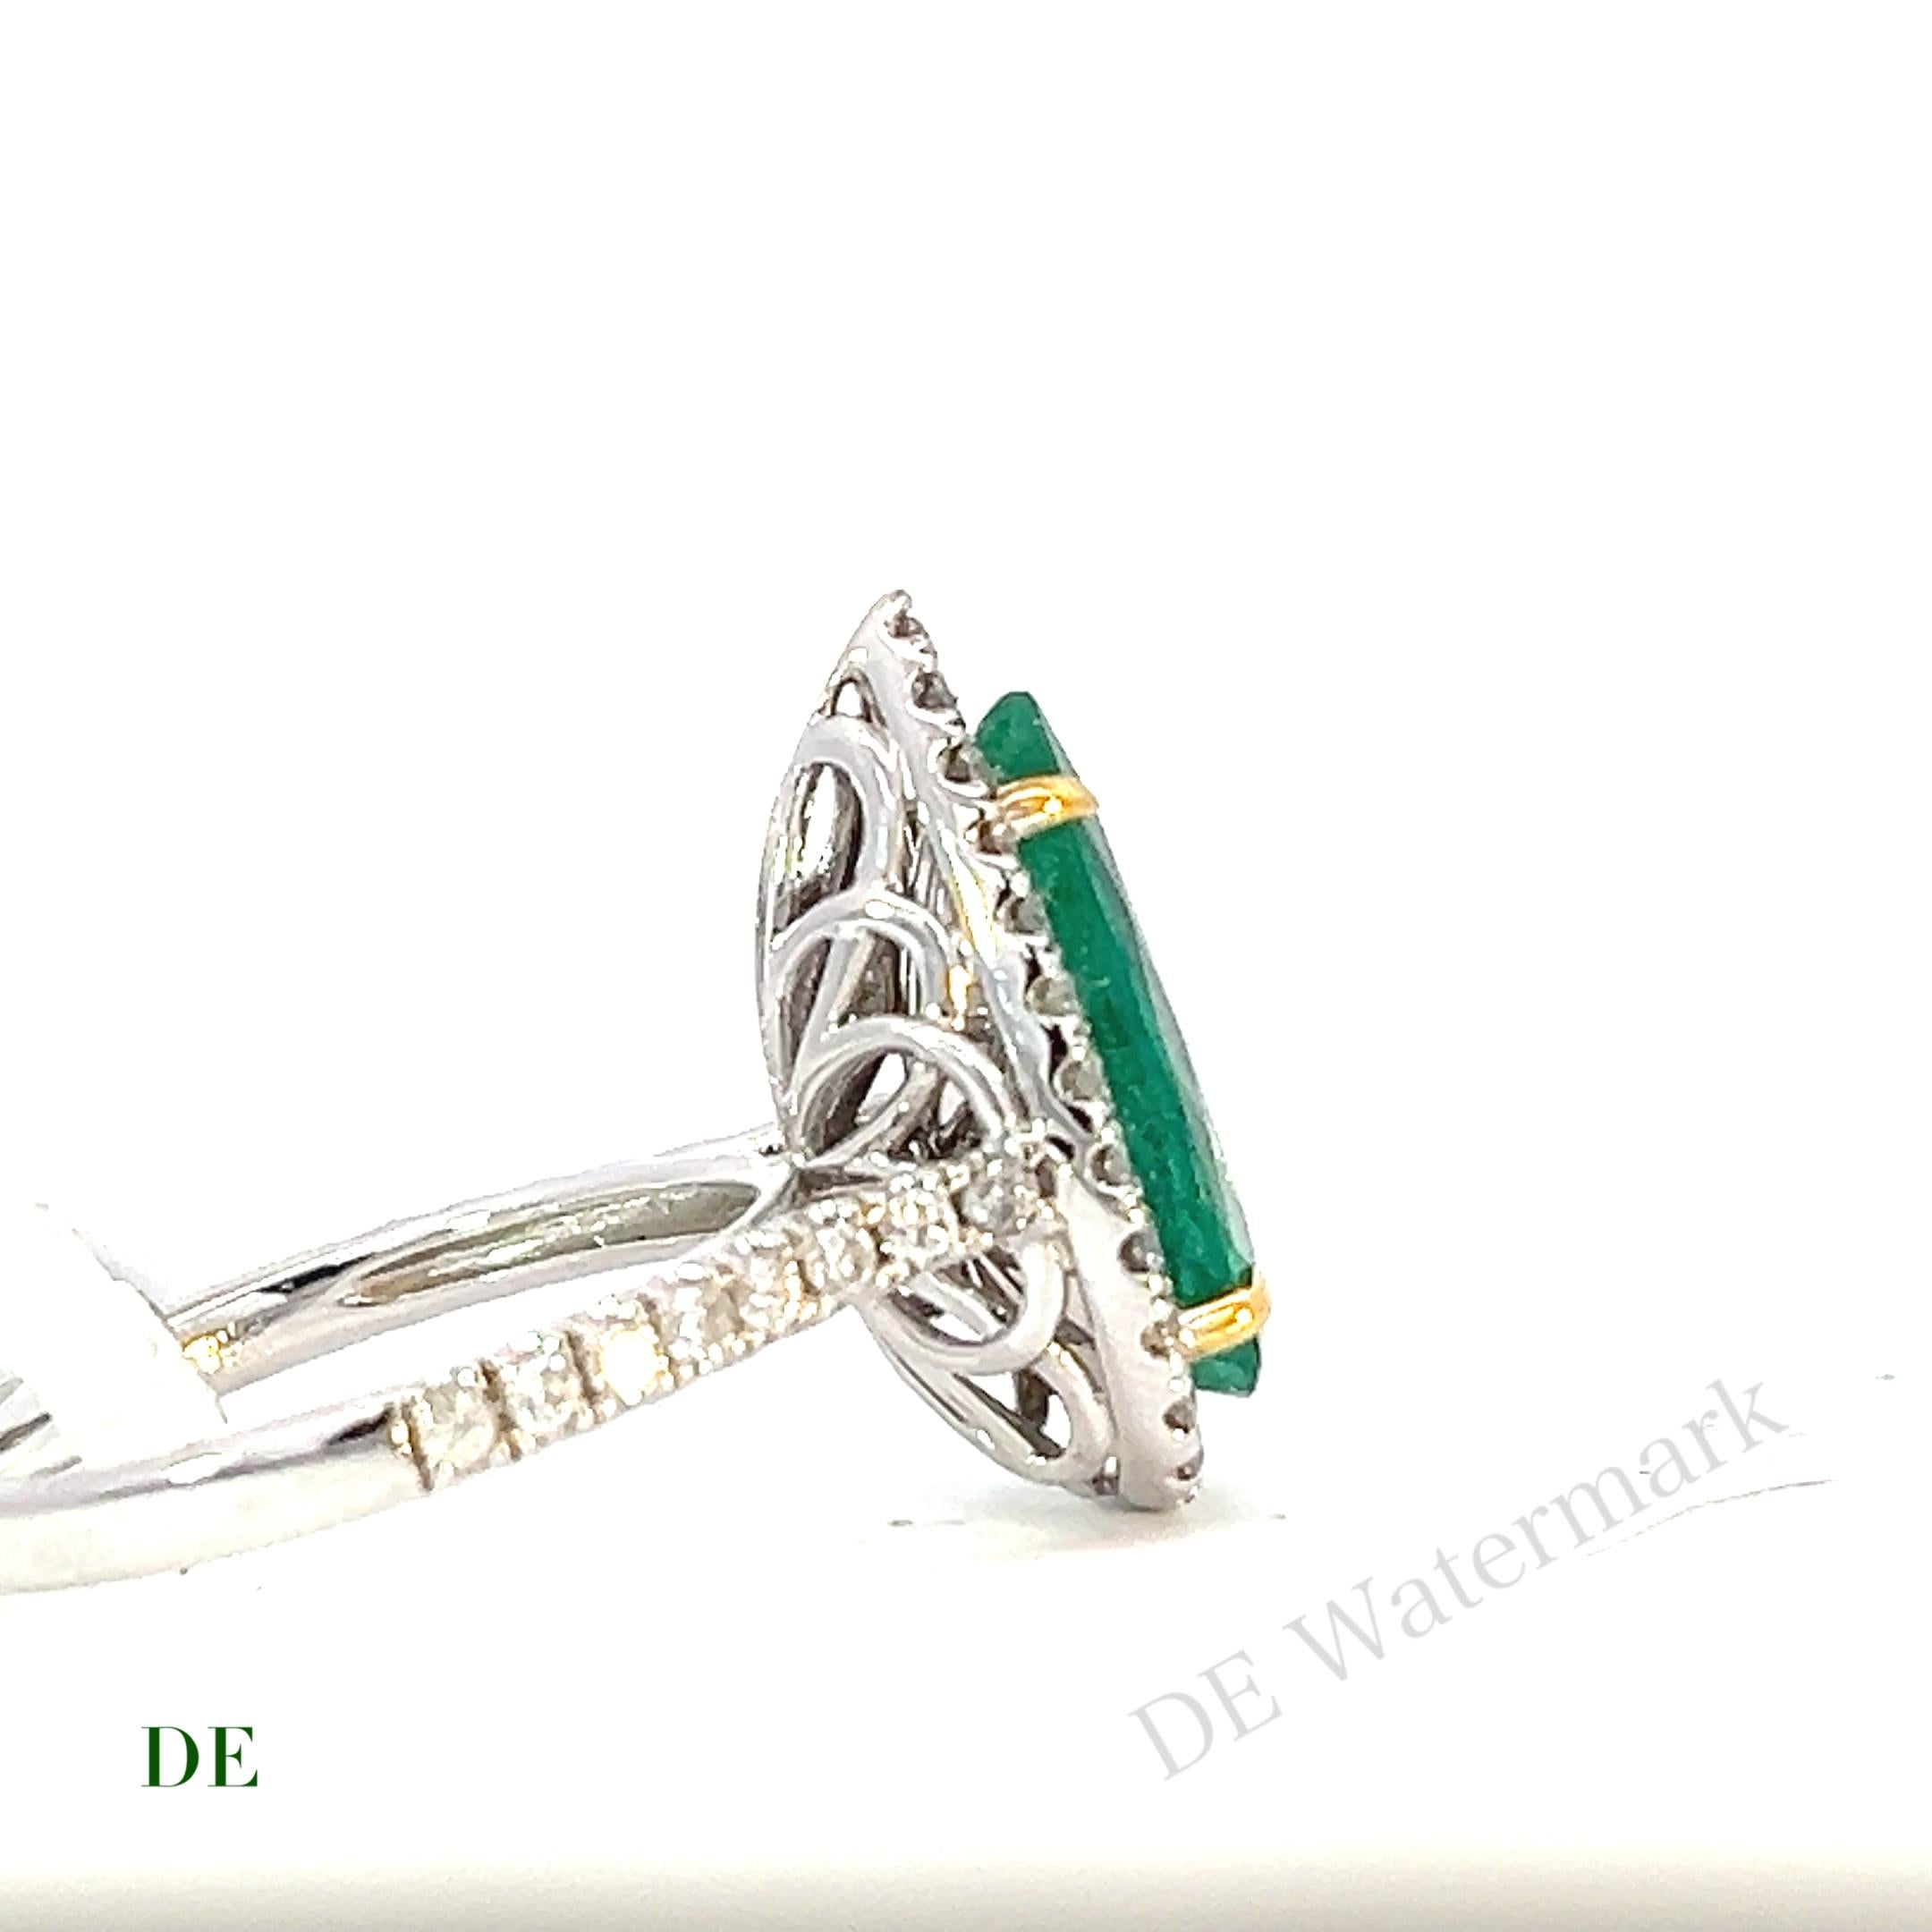 This luscious green emerald and diamond ring is an absolute showstopper that exudes luxury and elegance. The centerpiece of the ring is a stunning GIA certified natural green emerald that weighs approximately 3.94 carats. The emerald's color is